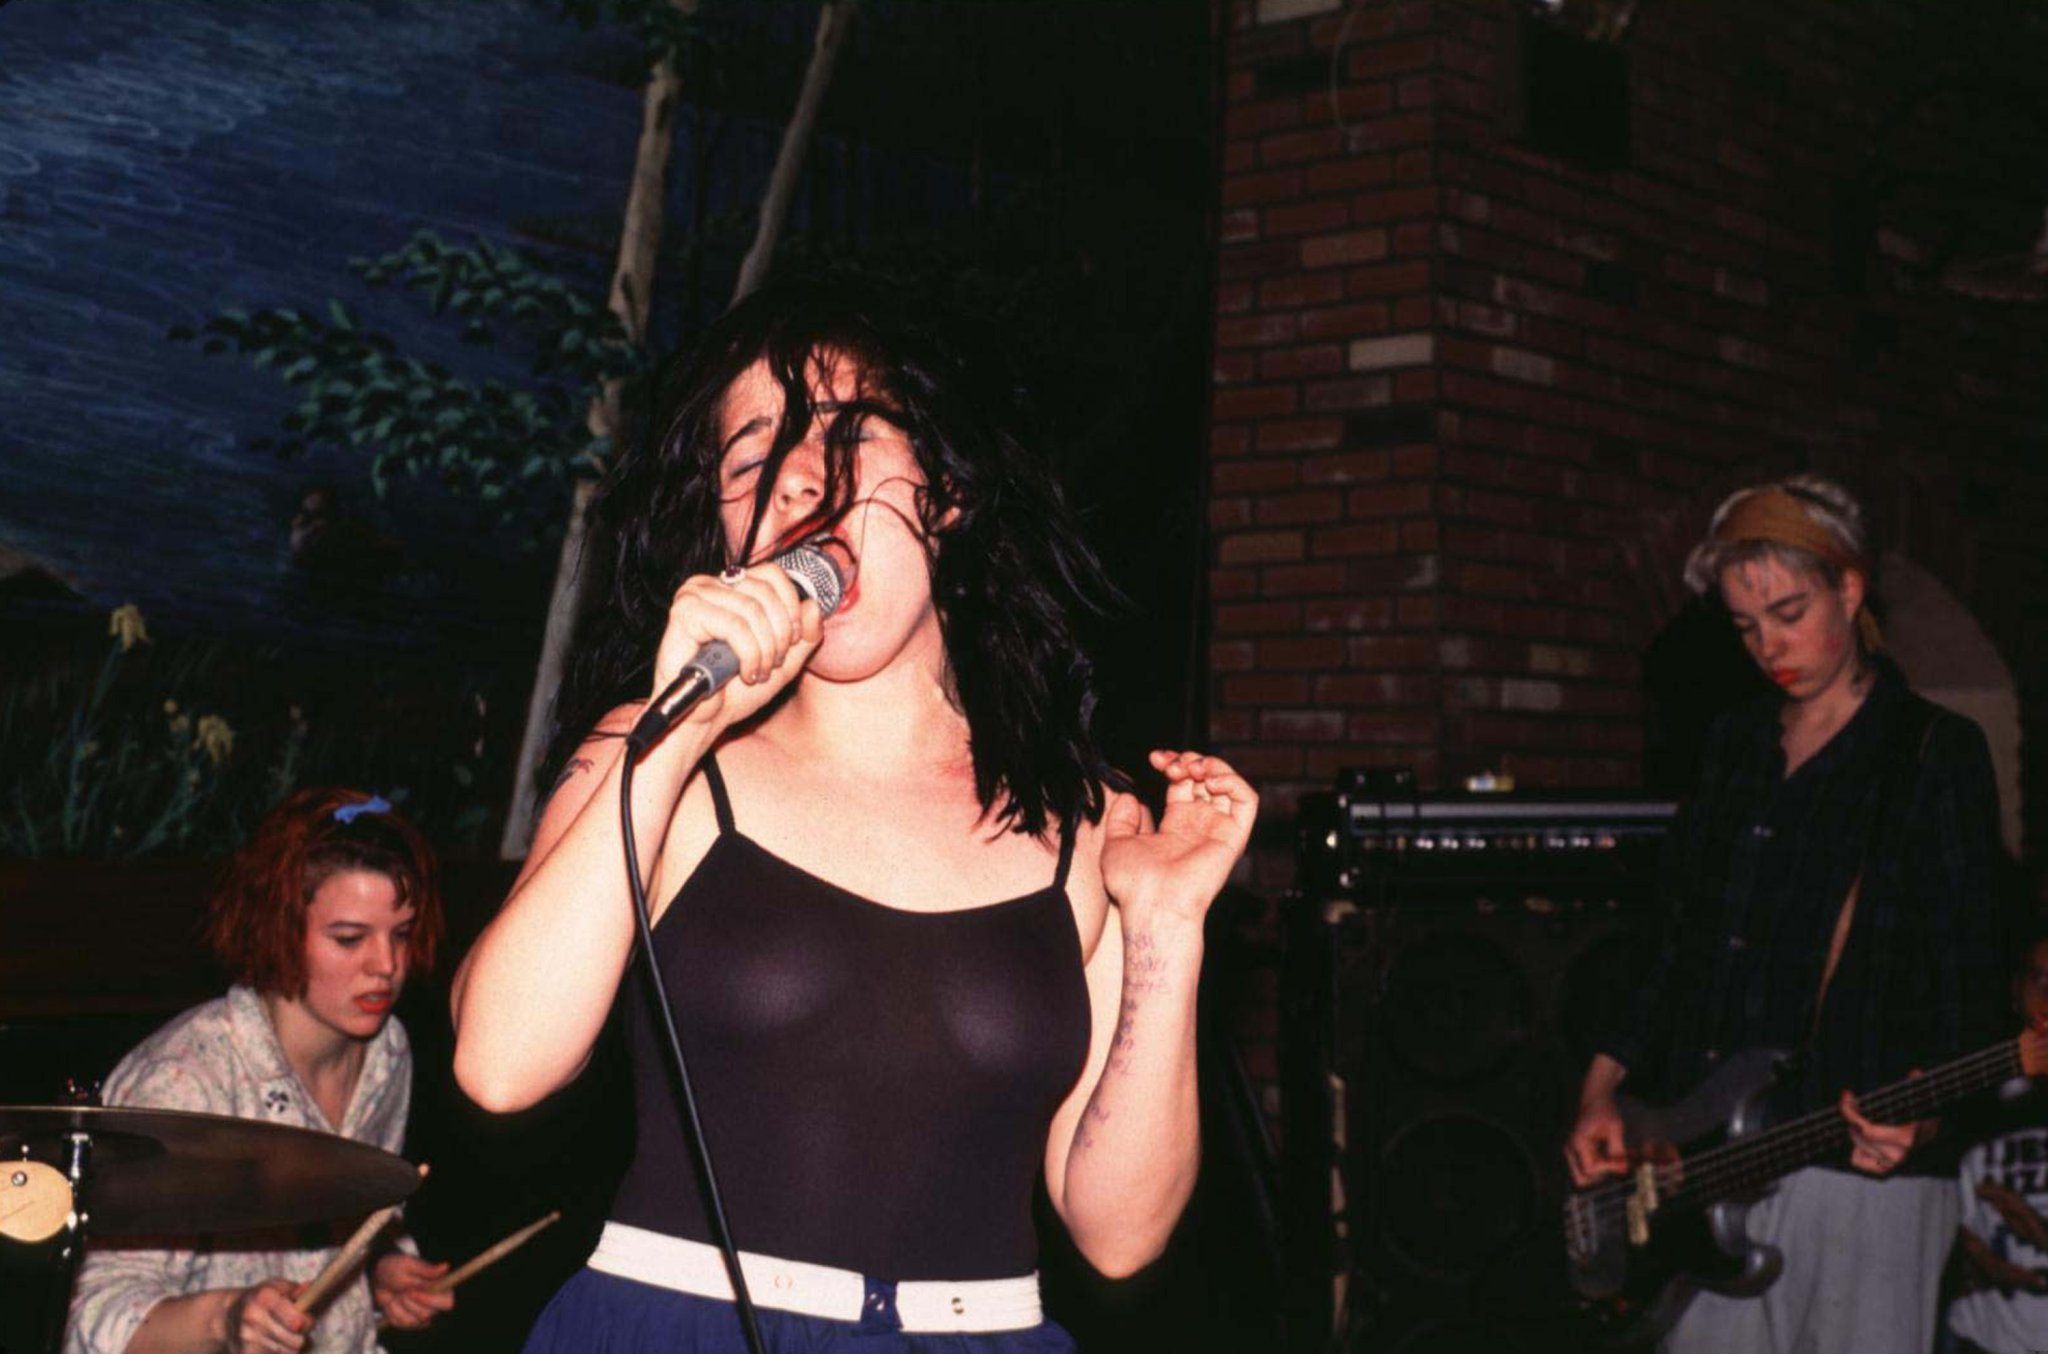 Counting down the best Riot Grrrl songs